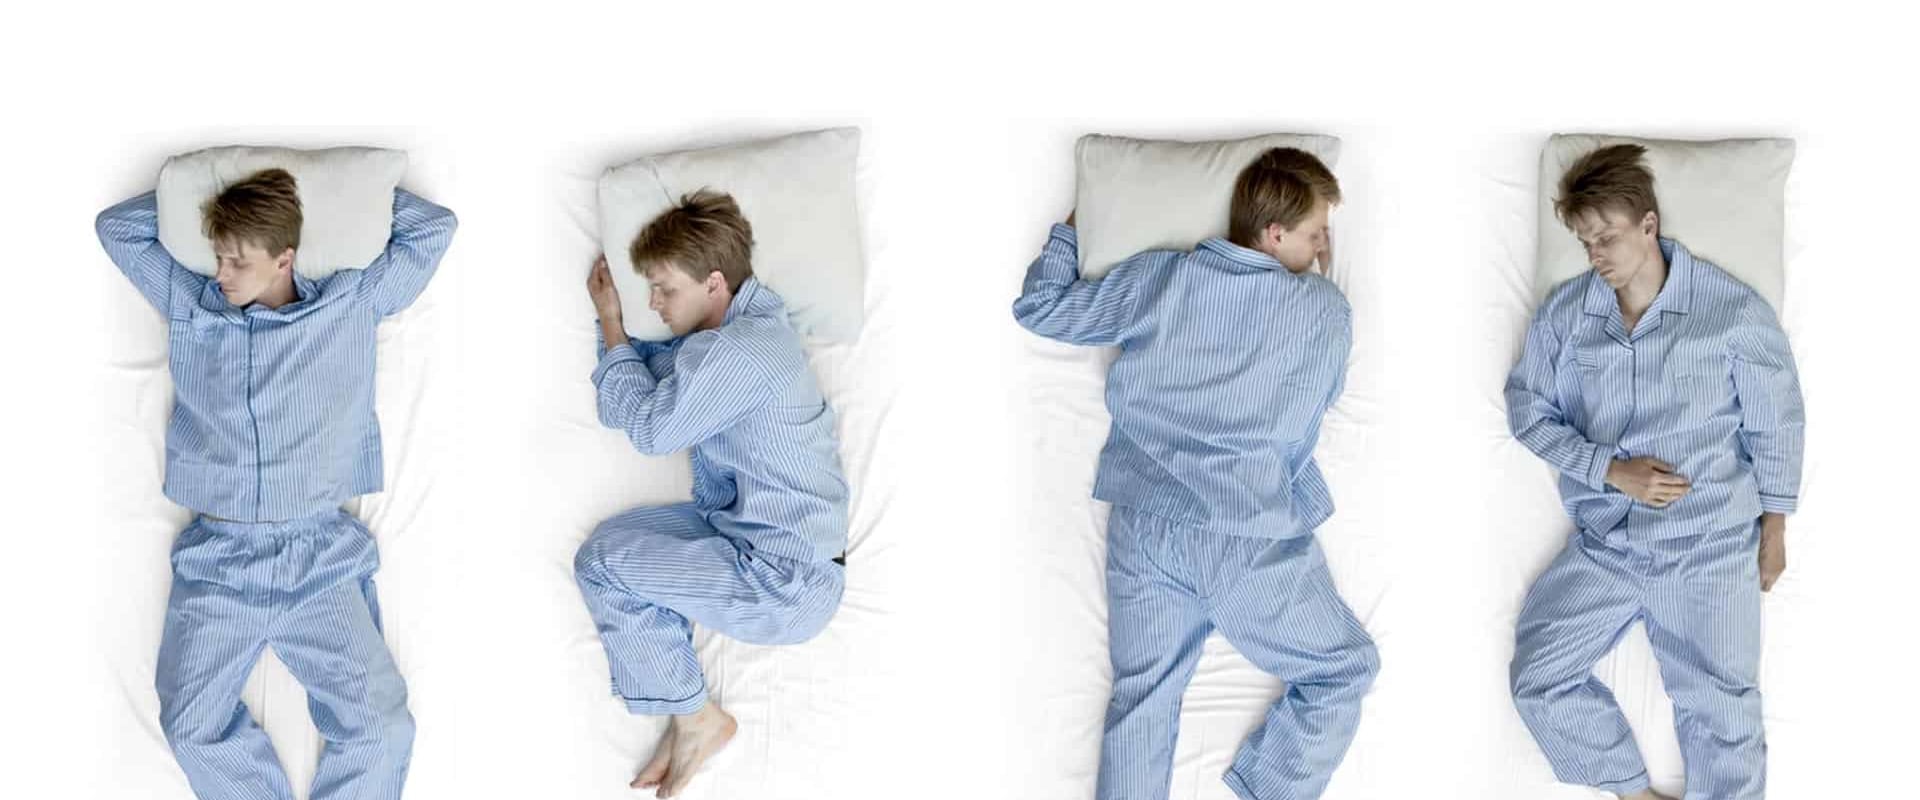 What is the healthiest sleeping position?